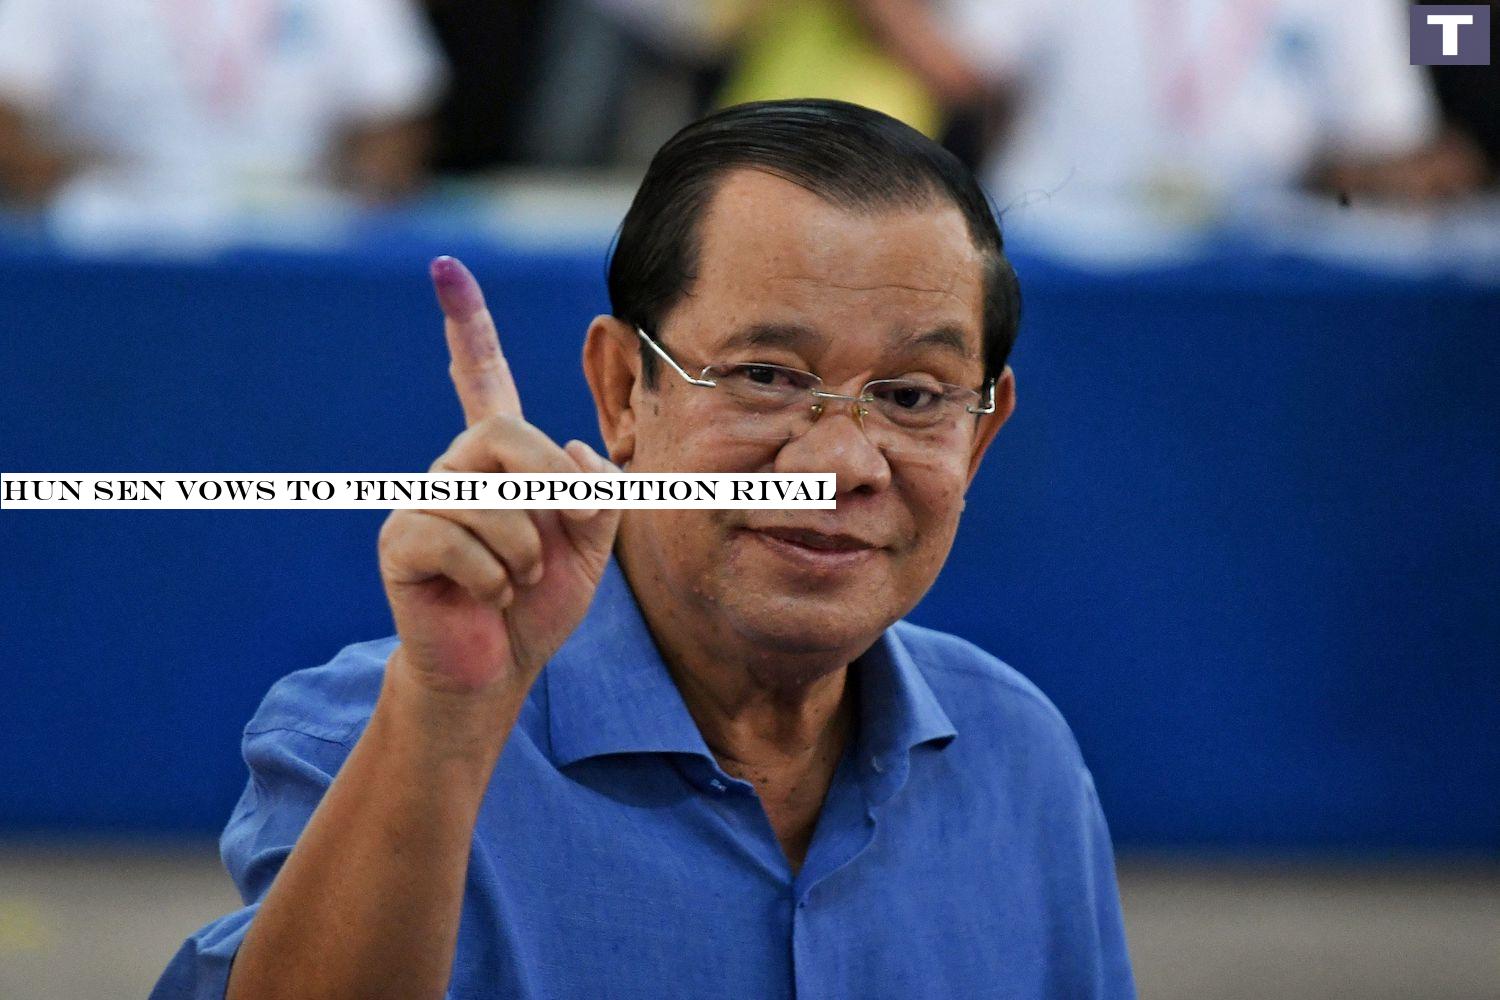 Hun Sen vows to 'finish' opposition rival